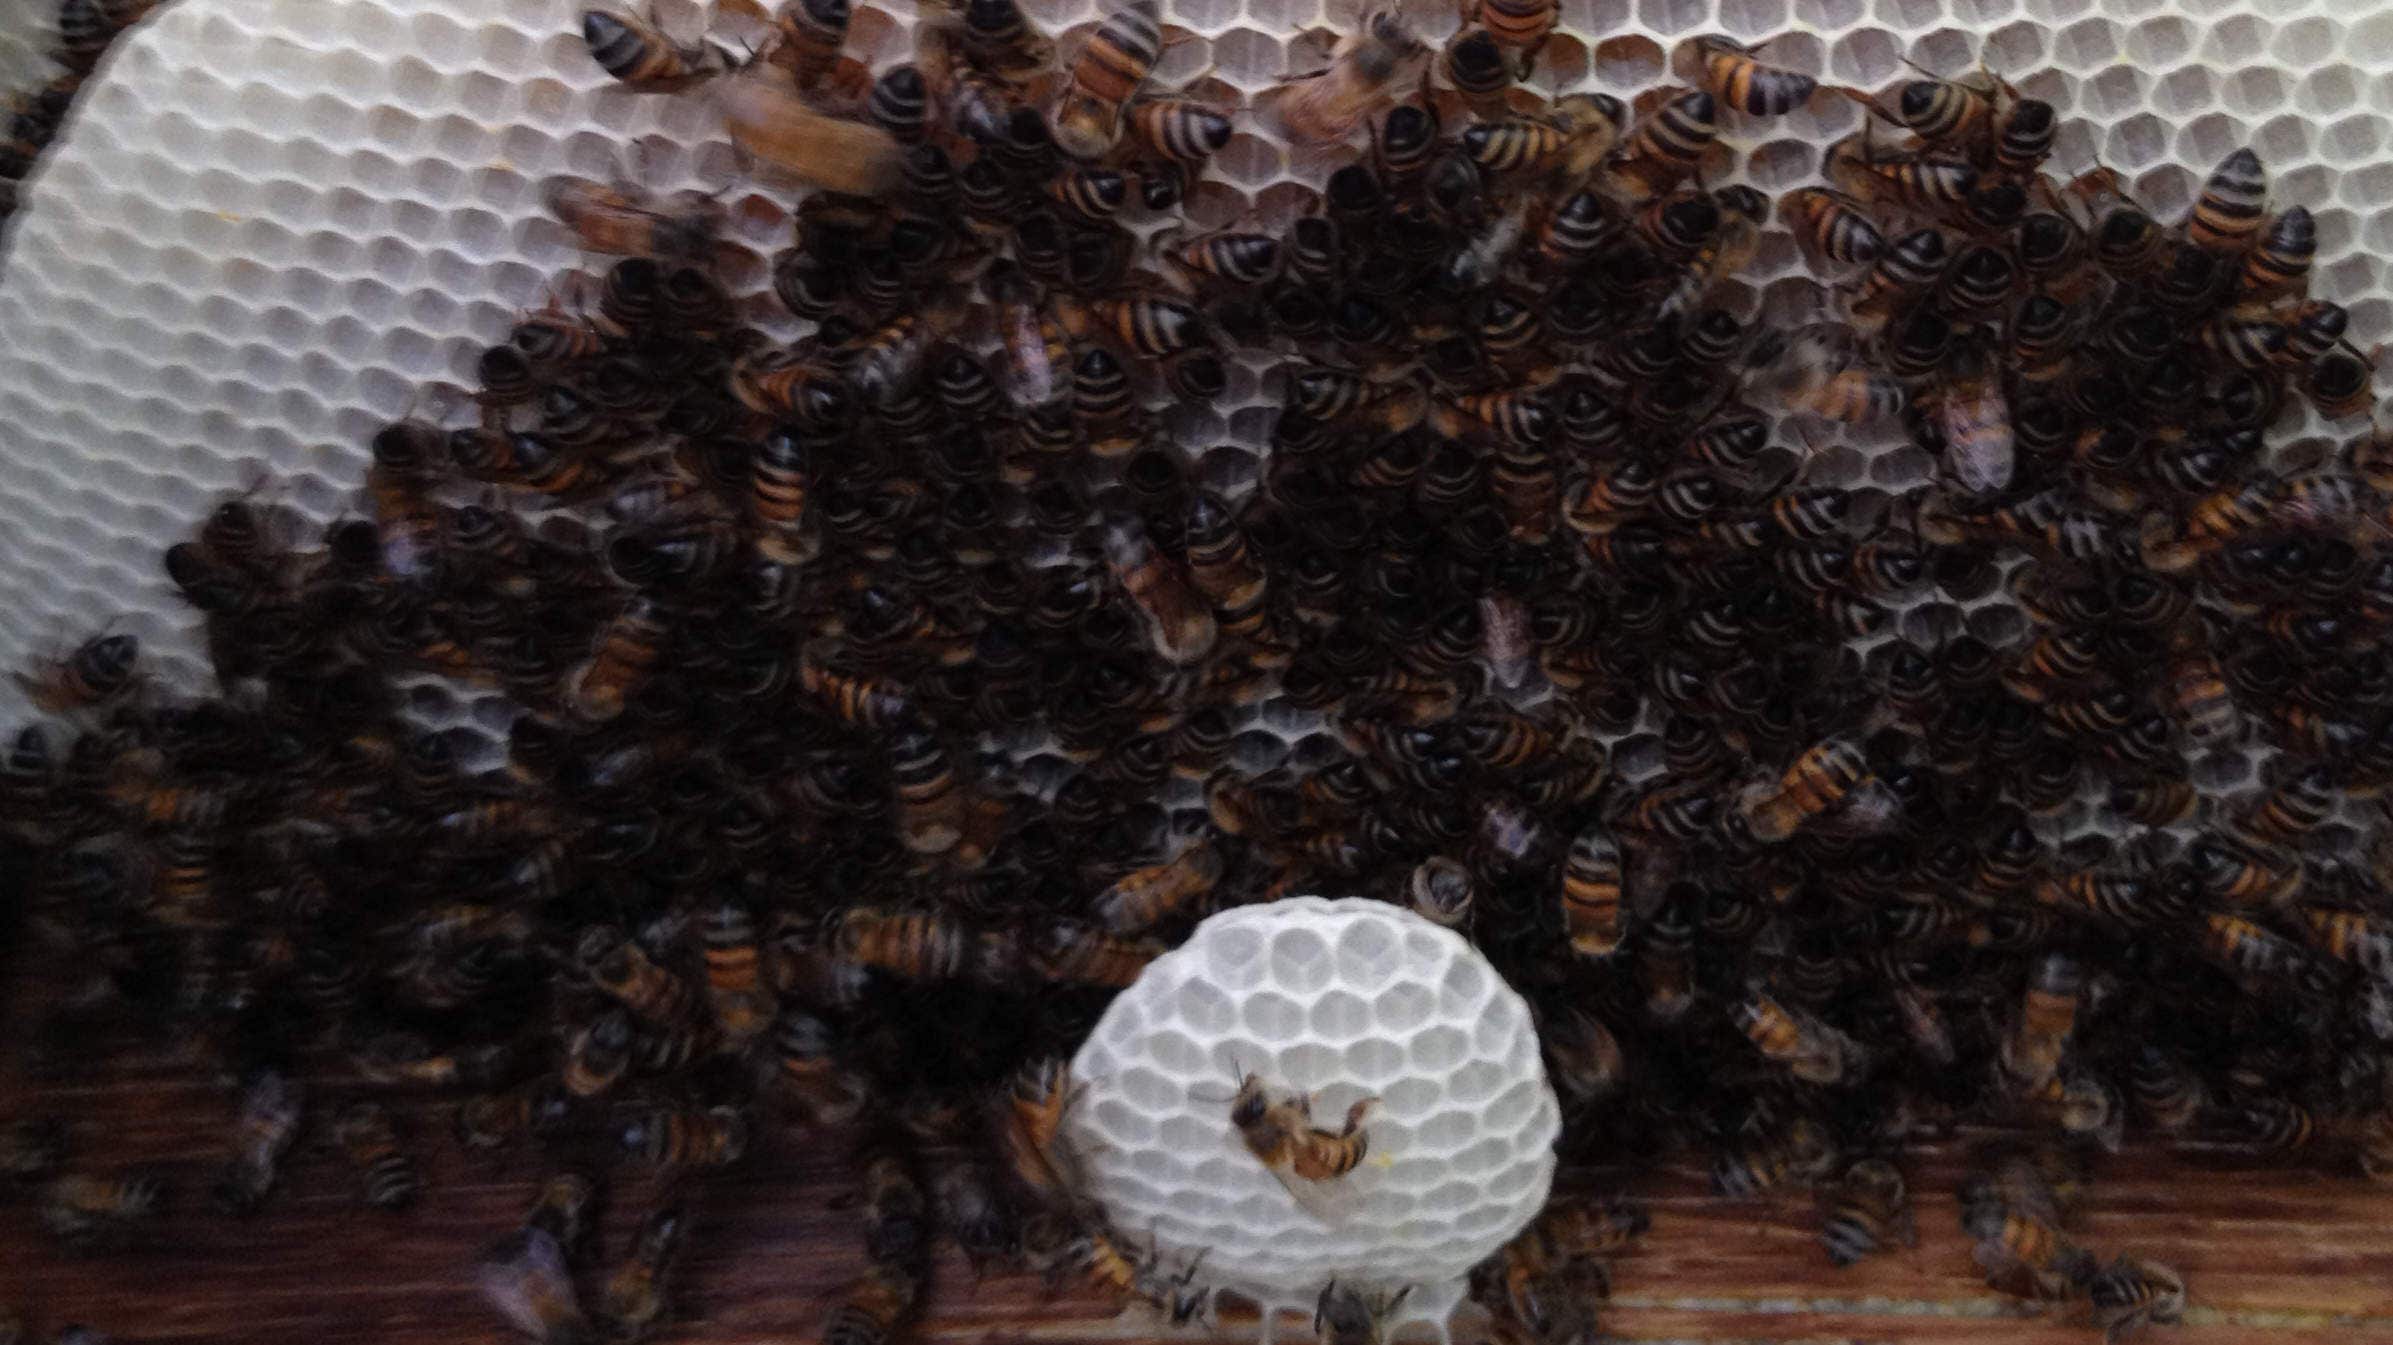 Man Dies In Arizona After Getting Stung By Hundreds Of Bees Fox News